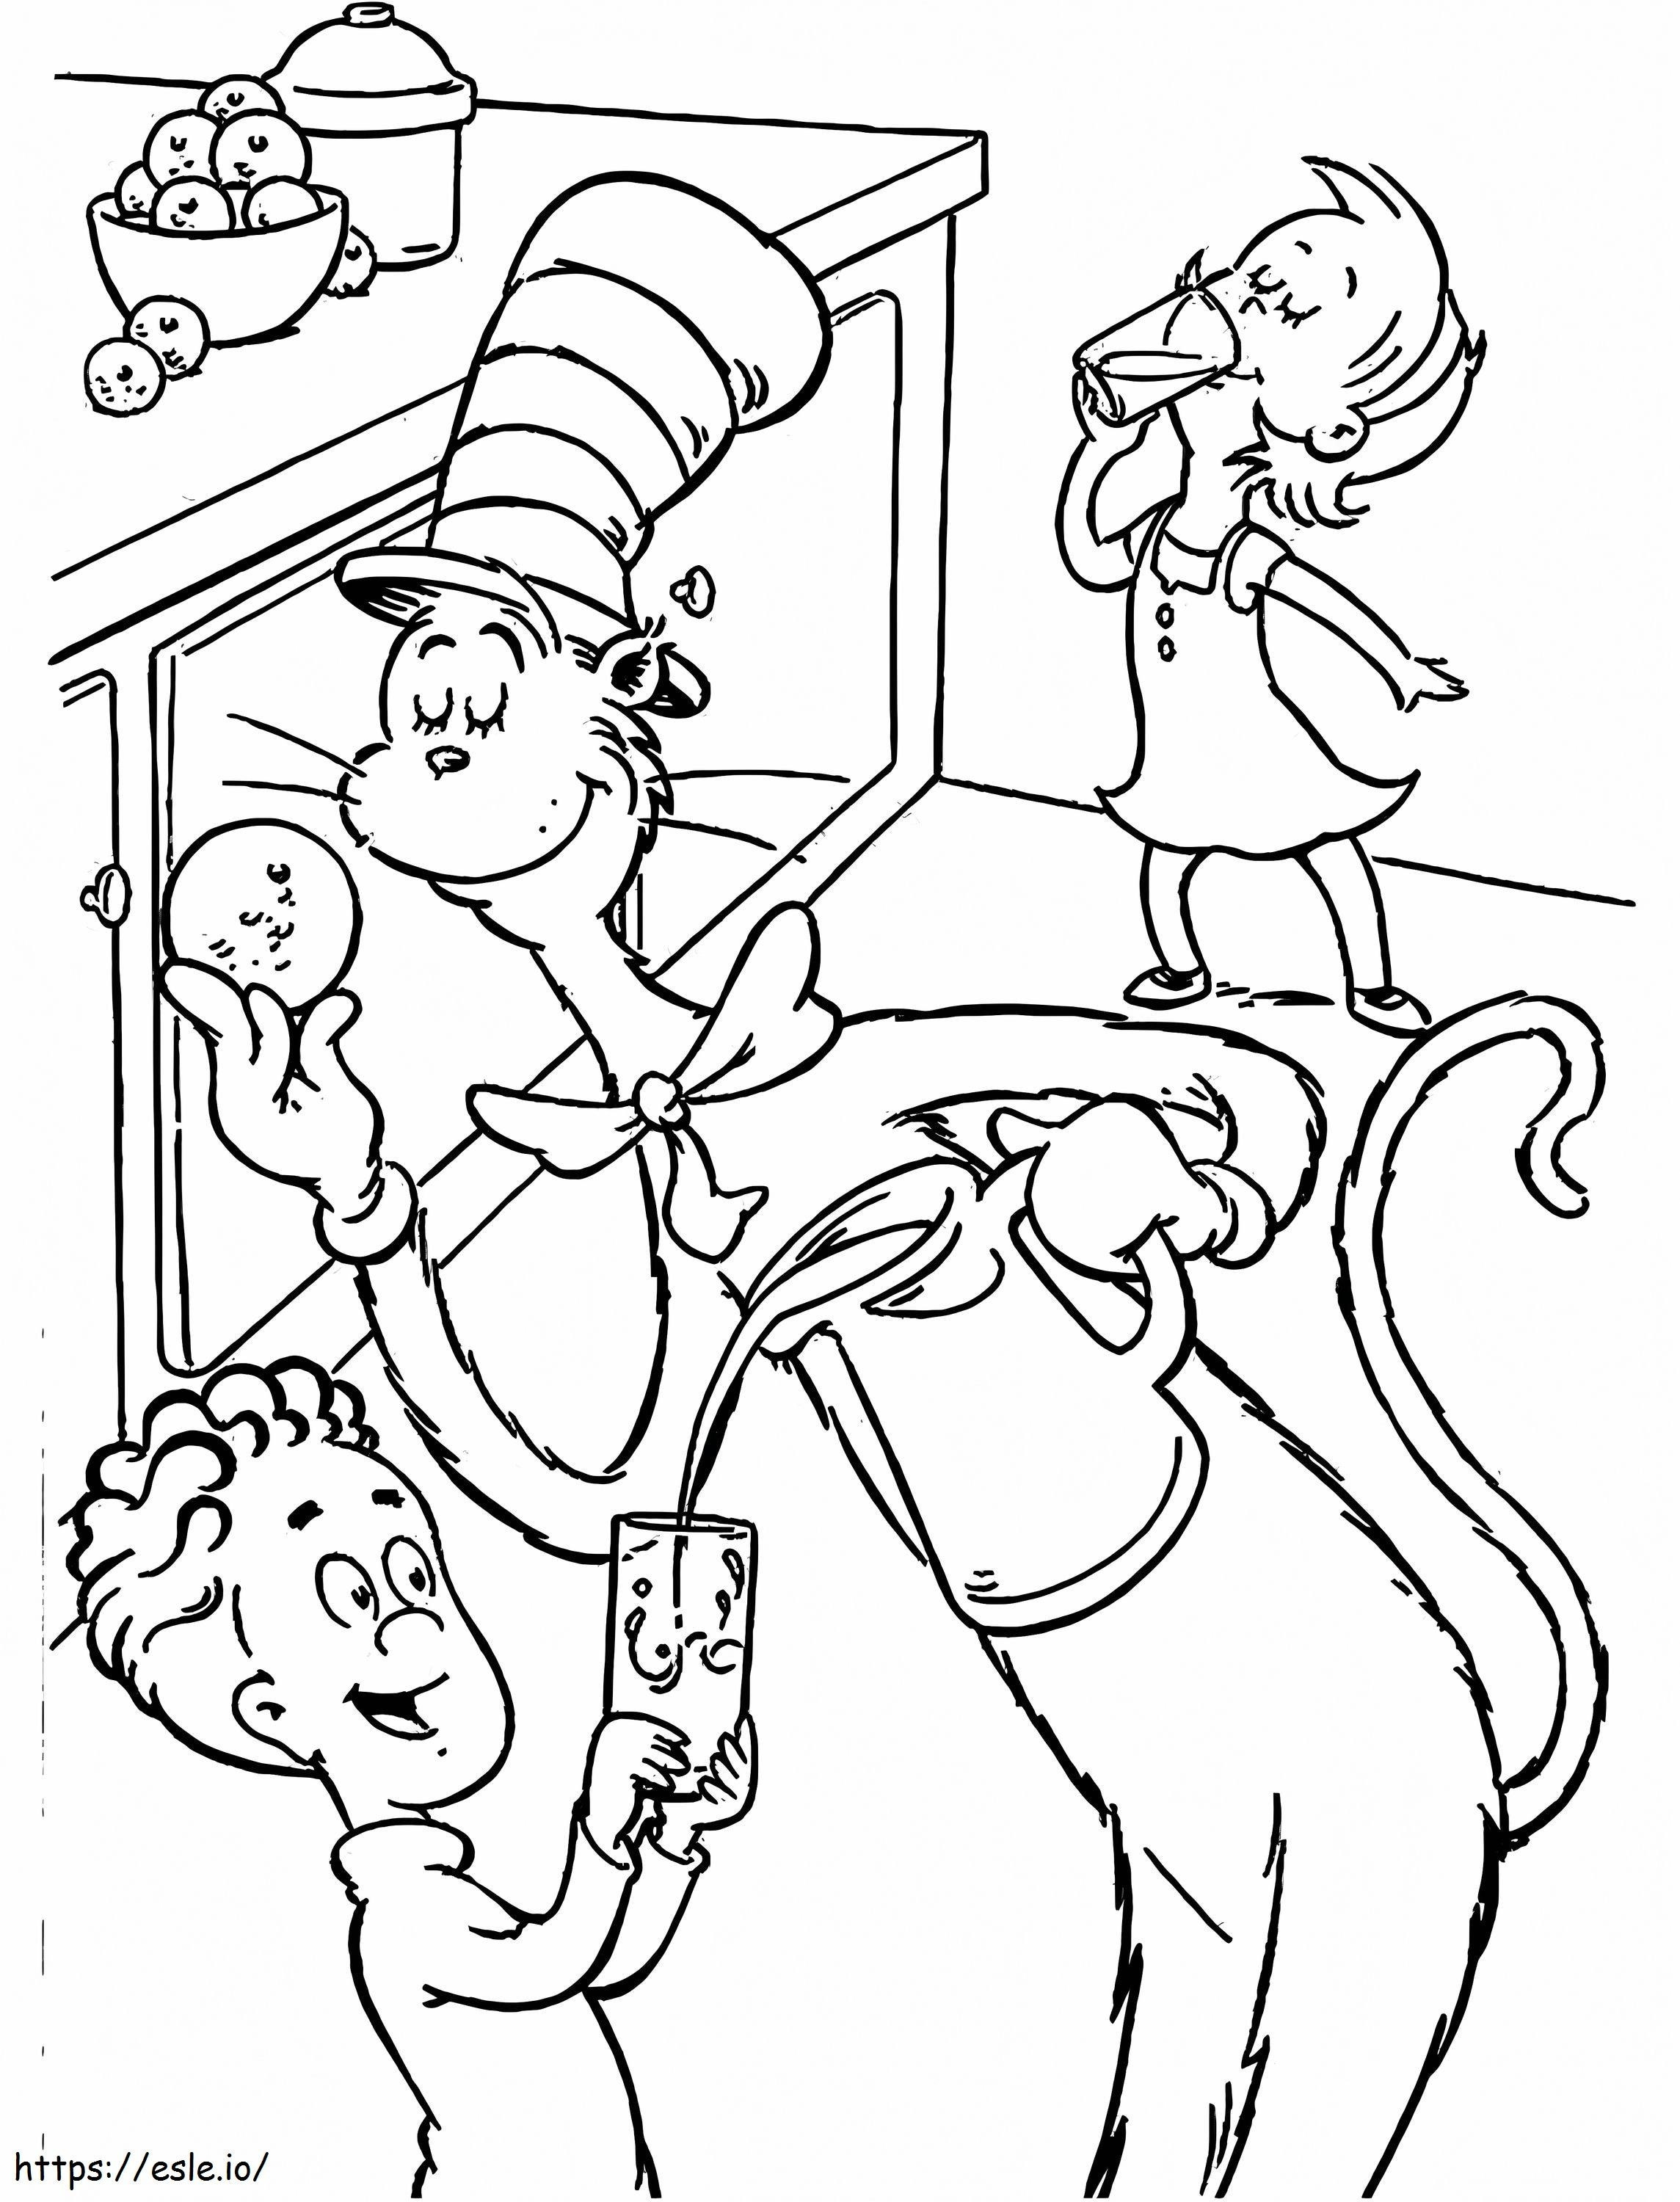 1567670309 Cat With Two Kids A4 coloring page